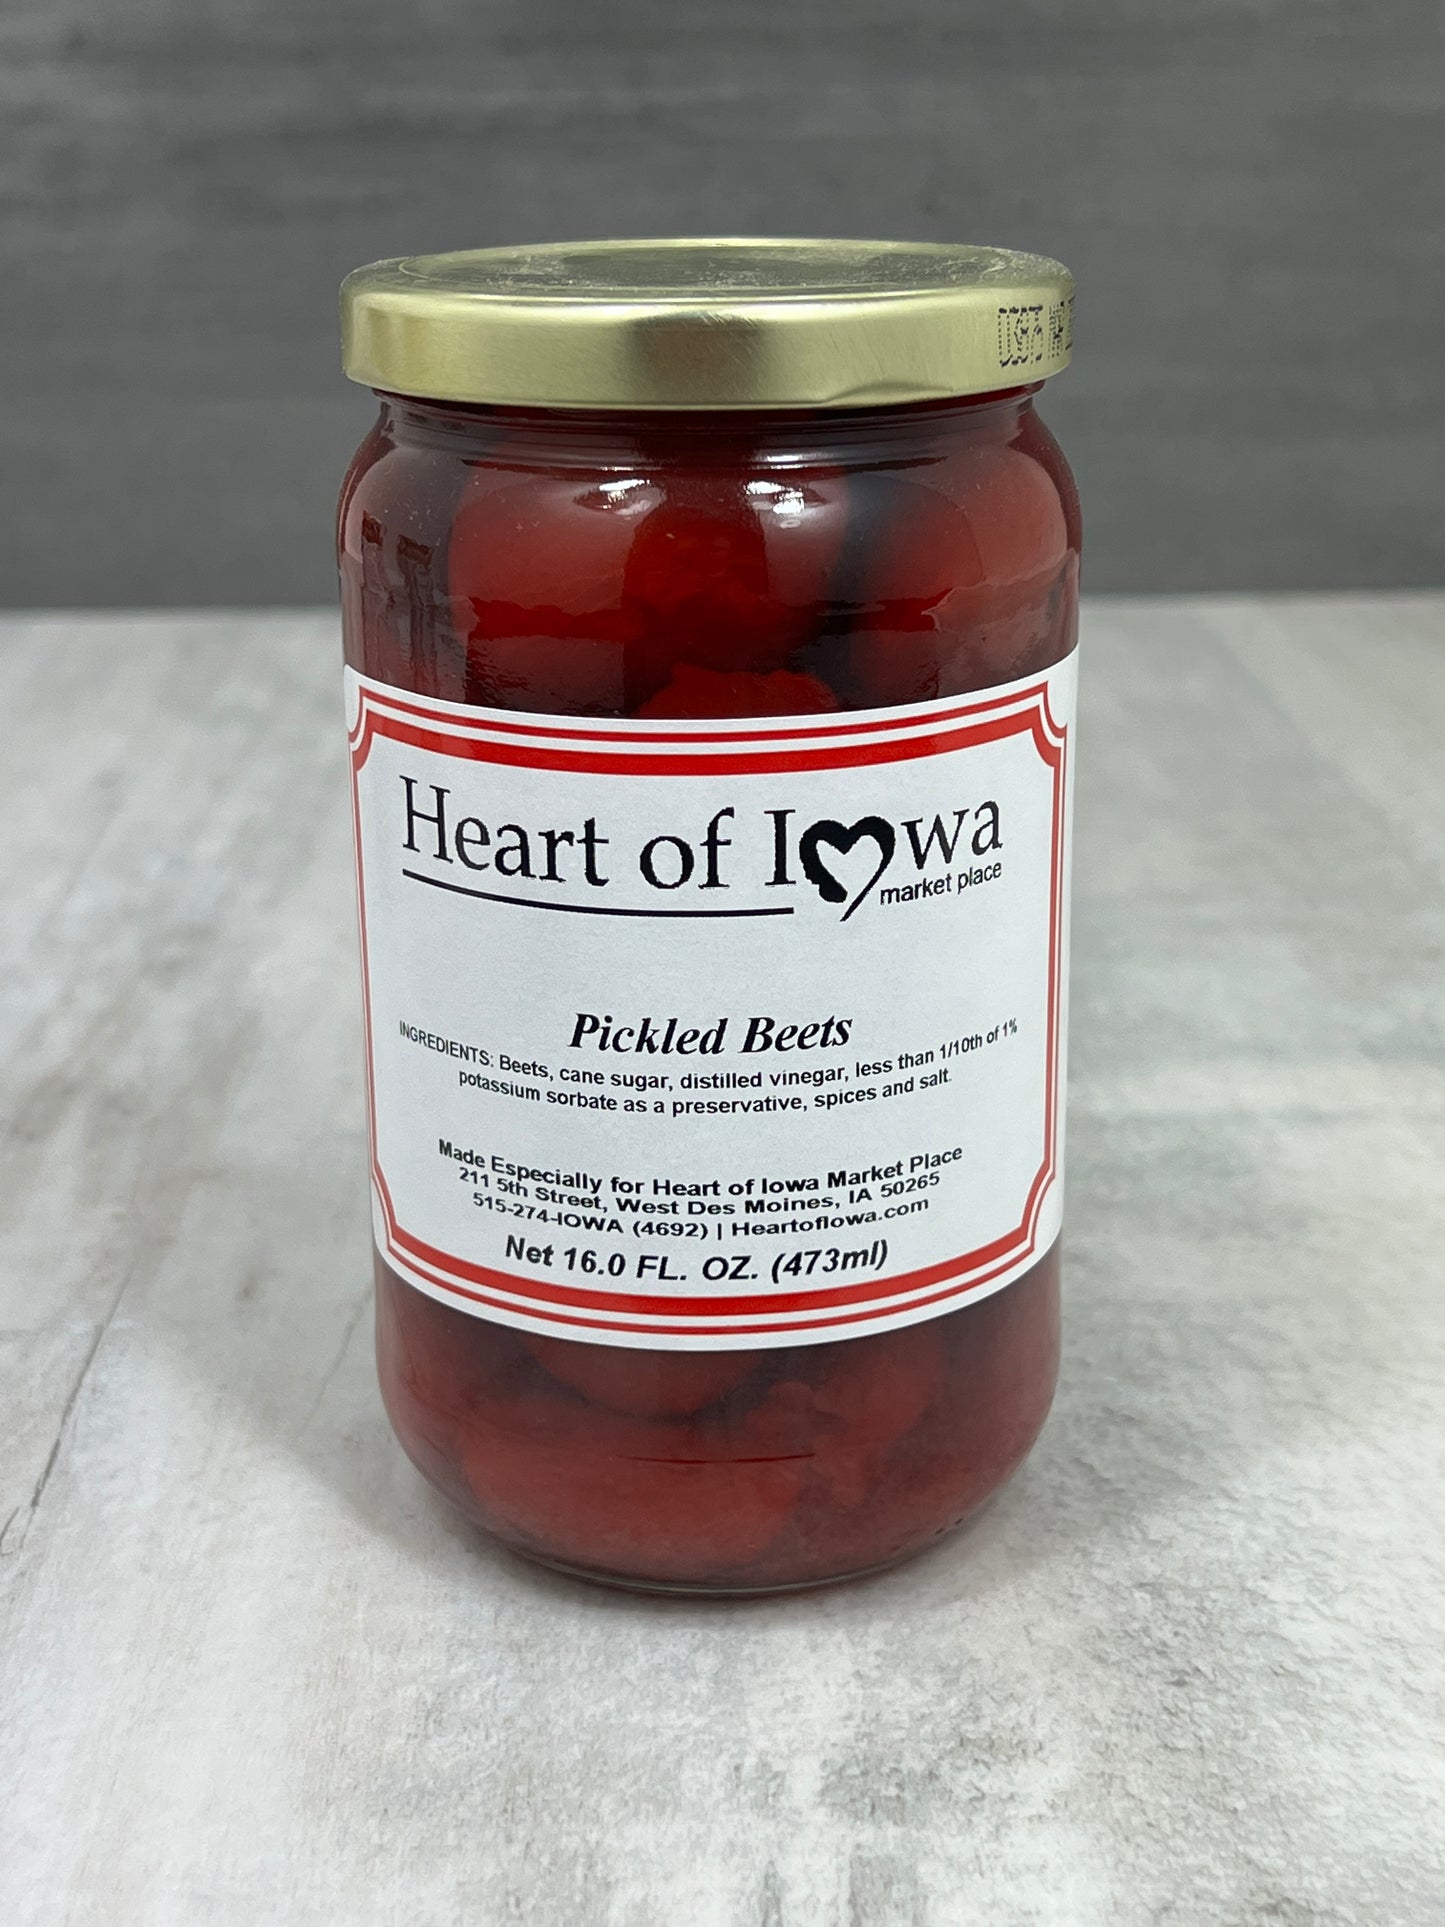 Heart of Iowa Pickled Products